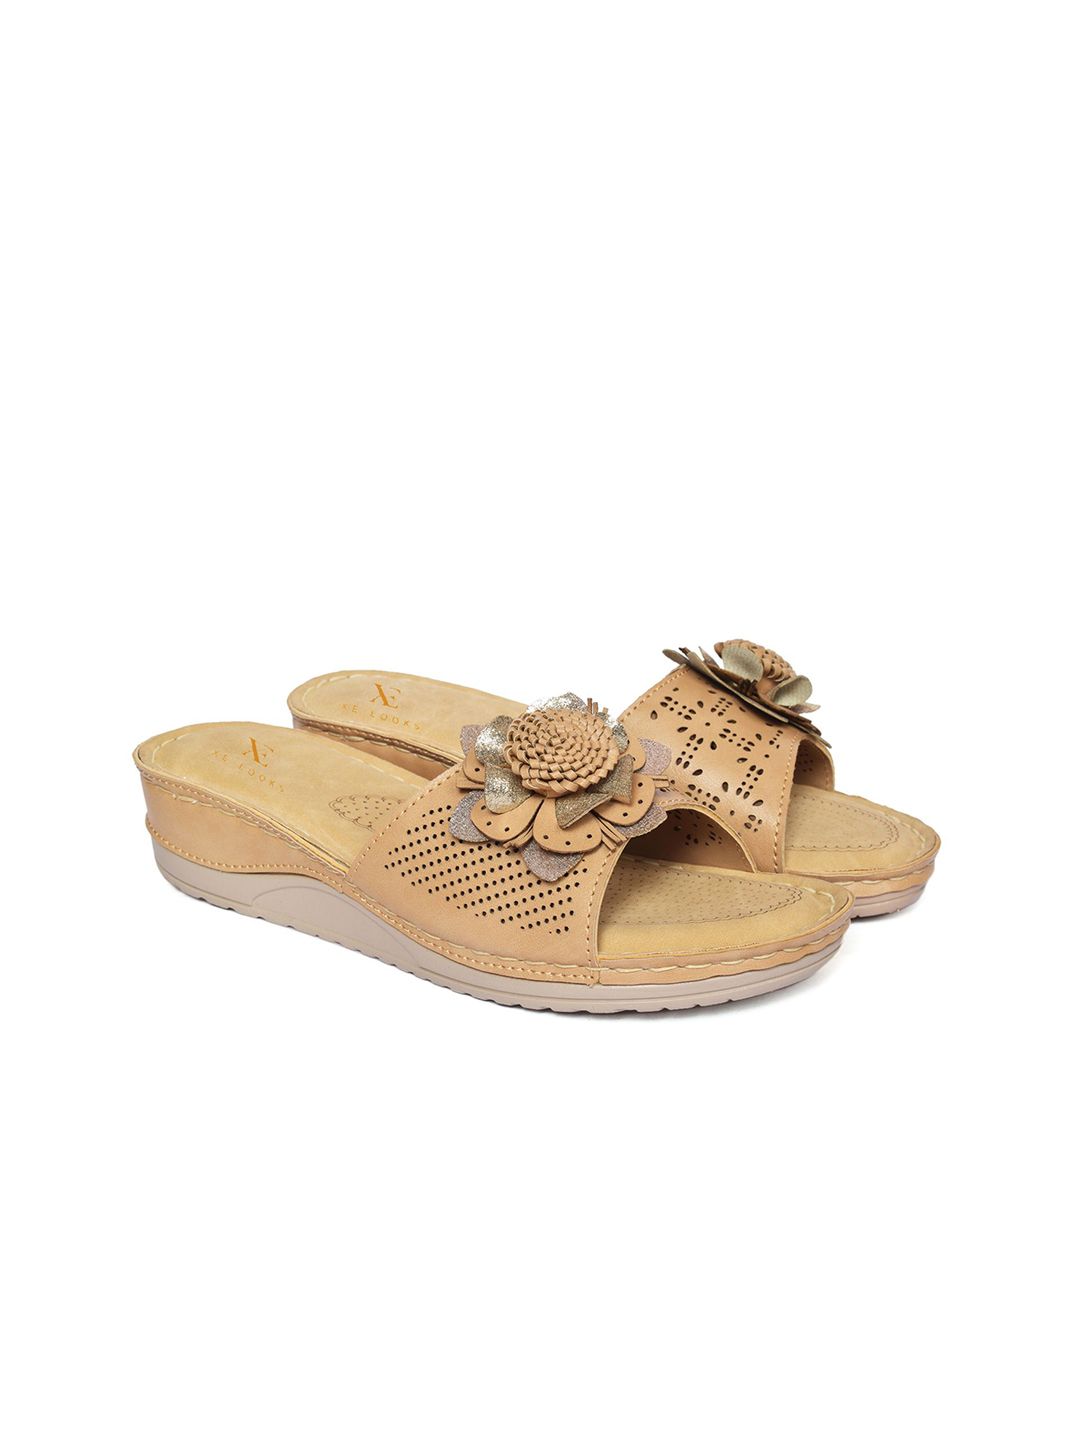 XE LOOKS Women Beige Open Toe Flats with Bows Price in India